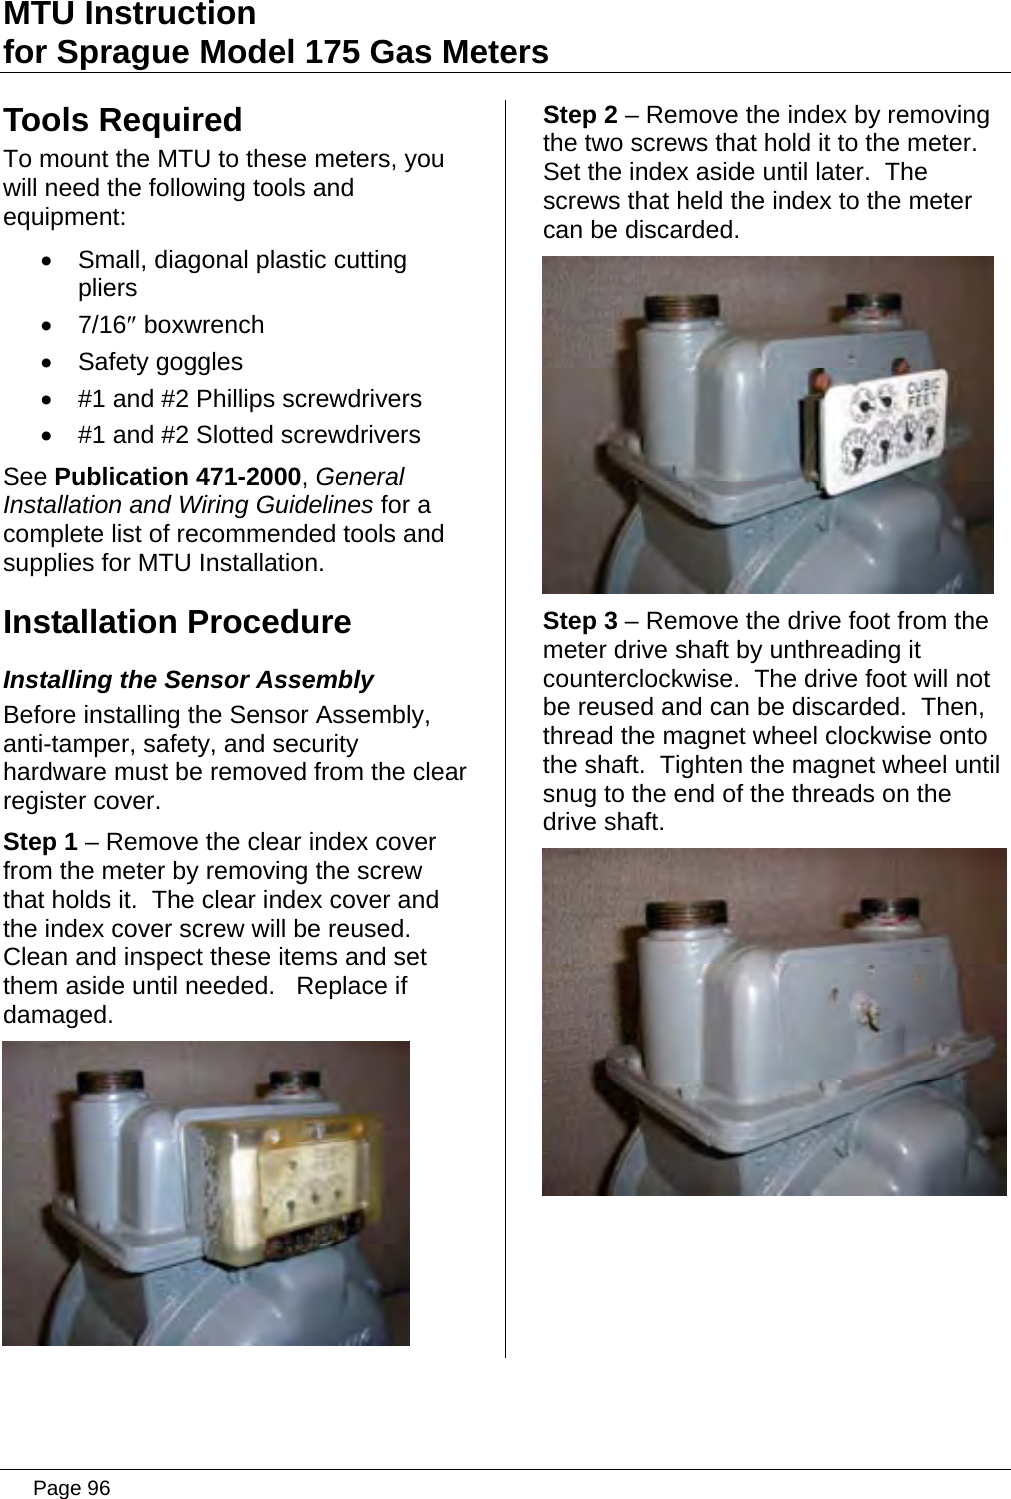 MTU Instruction for Sprague Model 175 Gas Meters Tools Required To mount the MTU to these meters, you will need the following tools and equipment: •  Small, diagonal plastic cutting pliers • 7/16″ boxwrench • Safety goggles •  #1 and #2 Phillips screwdrivers •  #1 and #2 Slotted screwdrivers See Publication 471-2000, General Installation and Wiring Guidelines for a complete list of recommended tools and supplies for MTU Installation. Installation Procedure Installing the Sensor Assembly Before installing the Sensor Assembly, anti-tamper, safety, and security hardware must be removed from the clear register cover. Step 1 – Remove the clear index cover from the meter by removing the screw that holds it.  The clear index cover and the index cover screw will be reused.  Clean and inspect these items and set them aside until needed.   Replace if damaged.  Step 2 – Remove the index by removing the two screws that hold it to the meter.  Set the index aside until later.  The screws that held the index to the meter can be discarded.  Step 3 – Remove the drive foot from the meter drive shaft by unthreading it counterclockwise.  The drive foot will not be reused and can be discarded.  Then, thread the magnet wheel clockwise onto the shaft.  Tighten the magnet wheel until snug to the end of the threads on the drive shaft.   Page 96